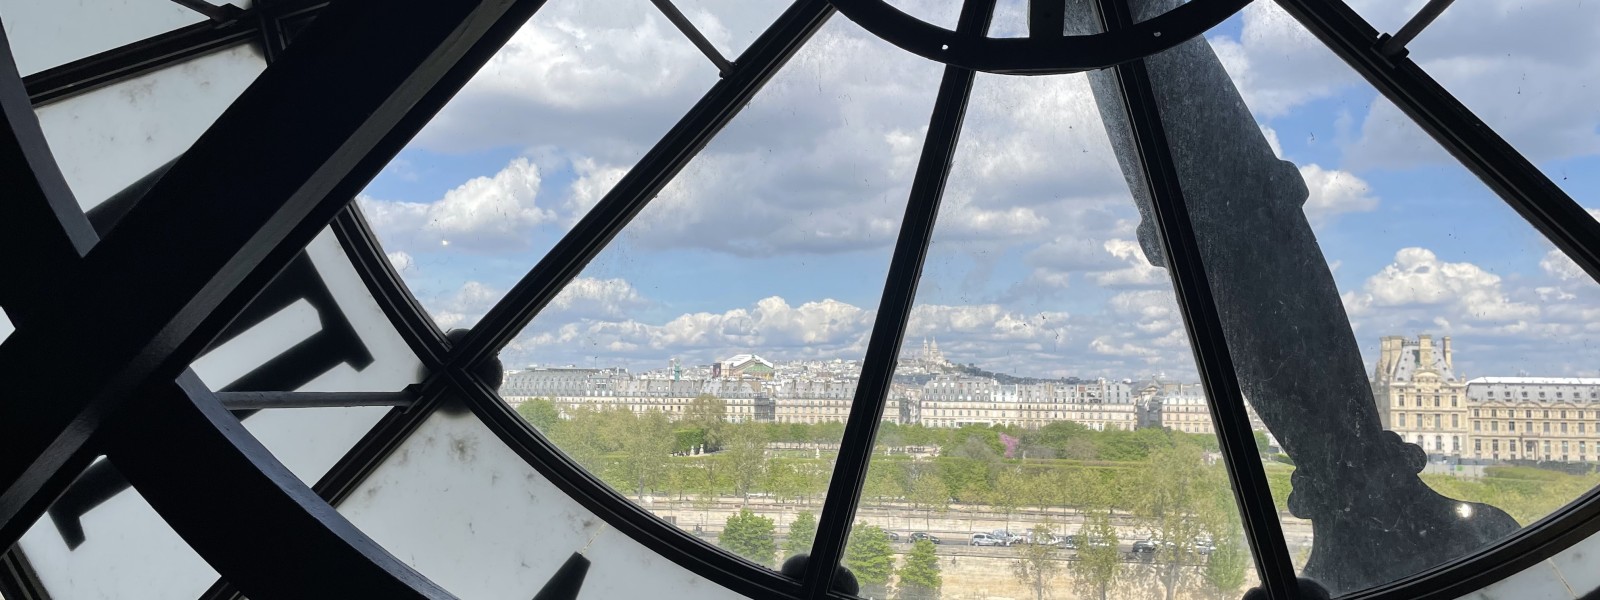 A block of Paris buildings can be seen through the museum’s clock window.